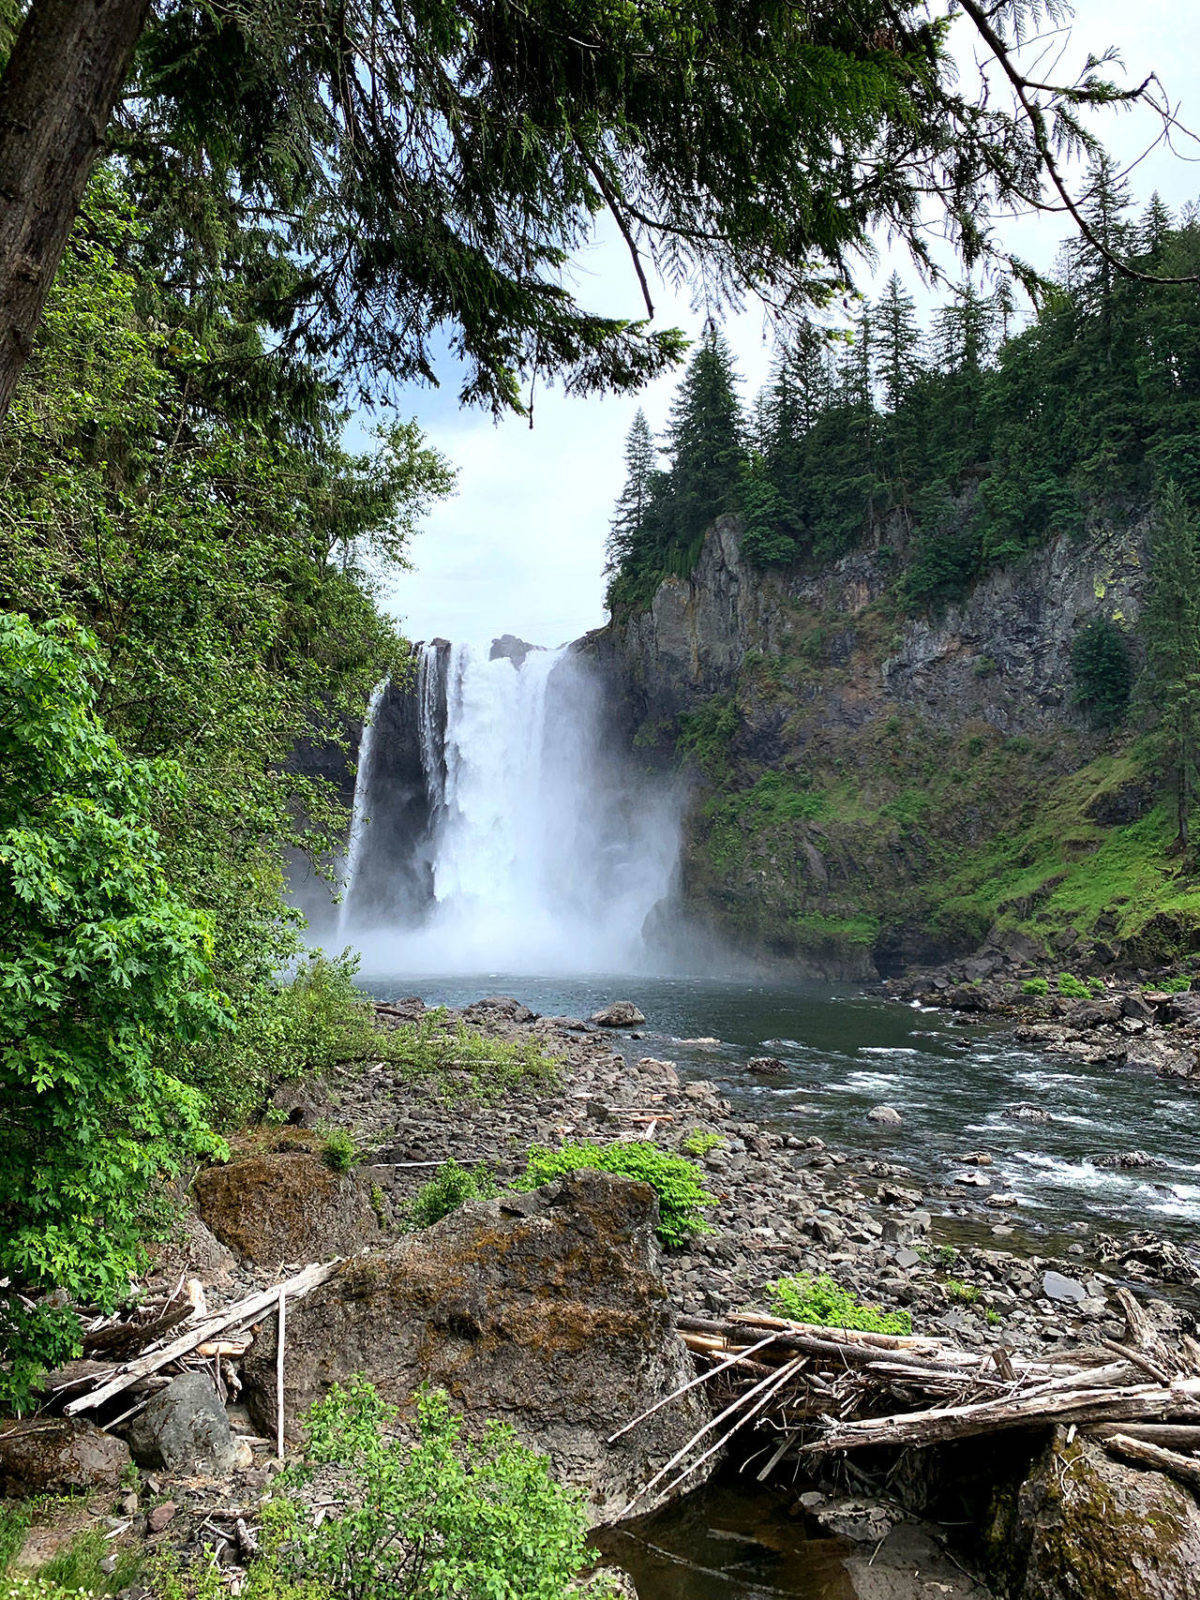 Snoqualmie Falls. File photo by Natalie DeFord.